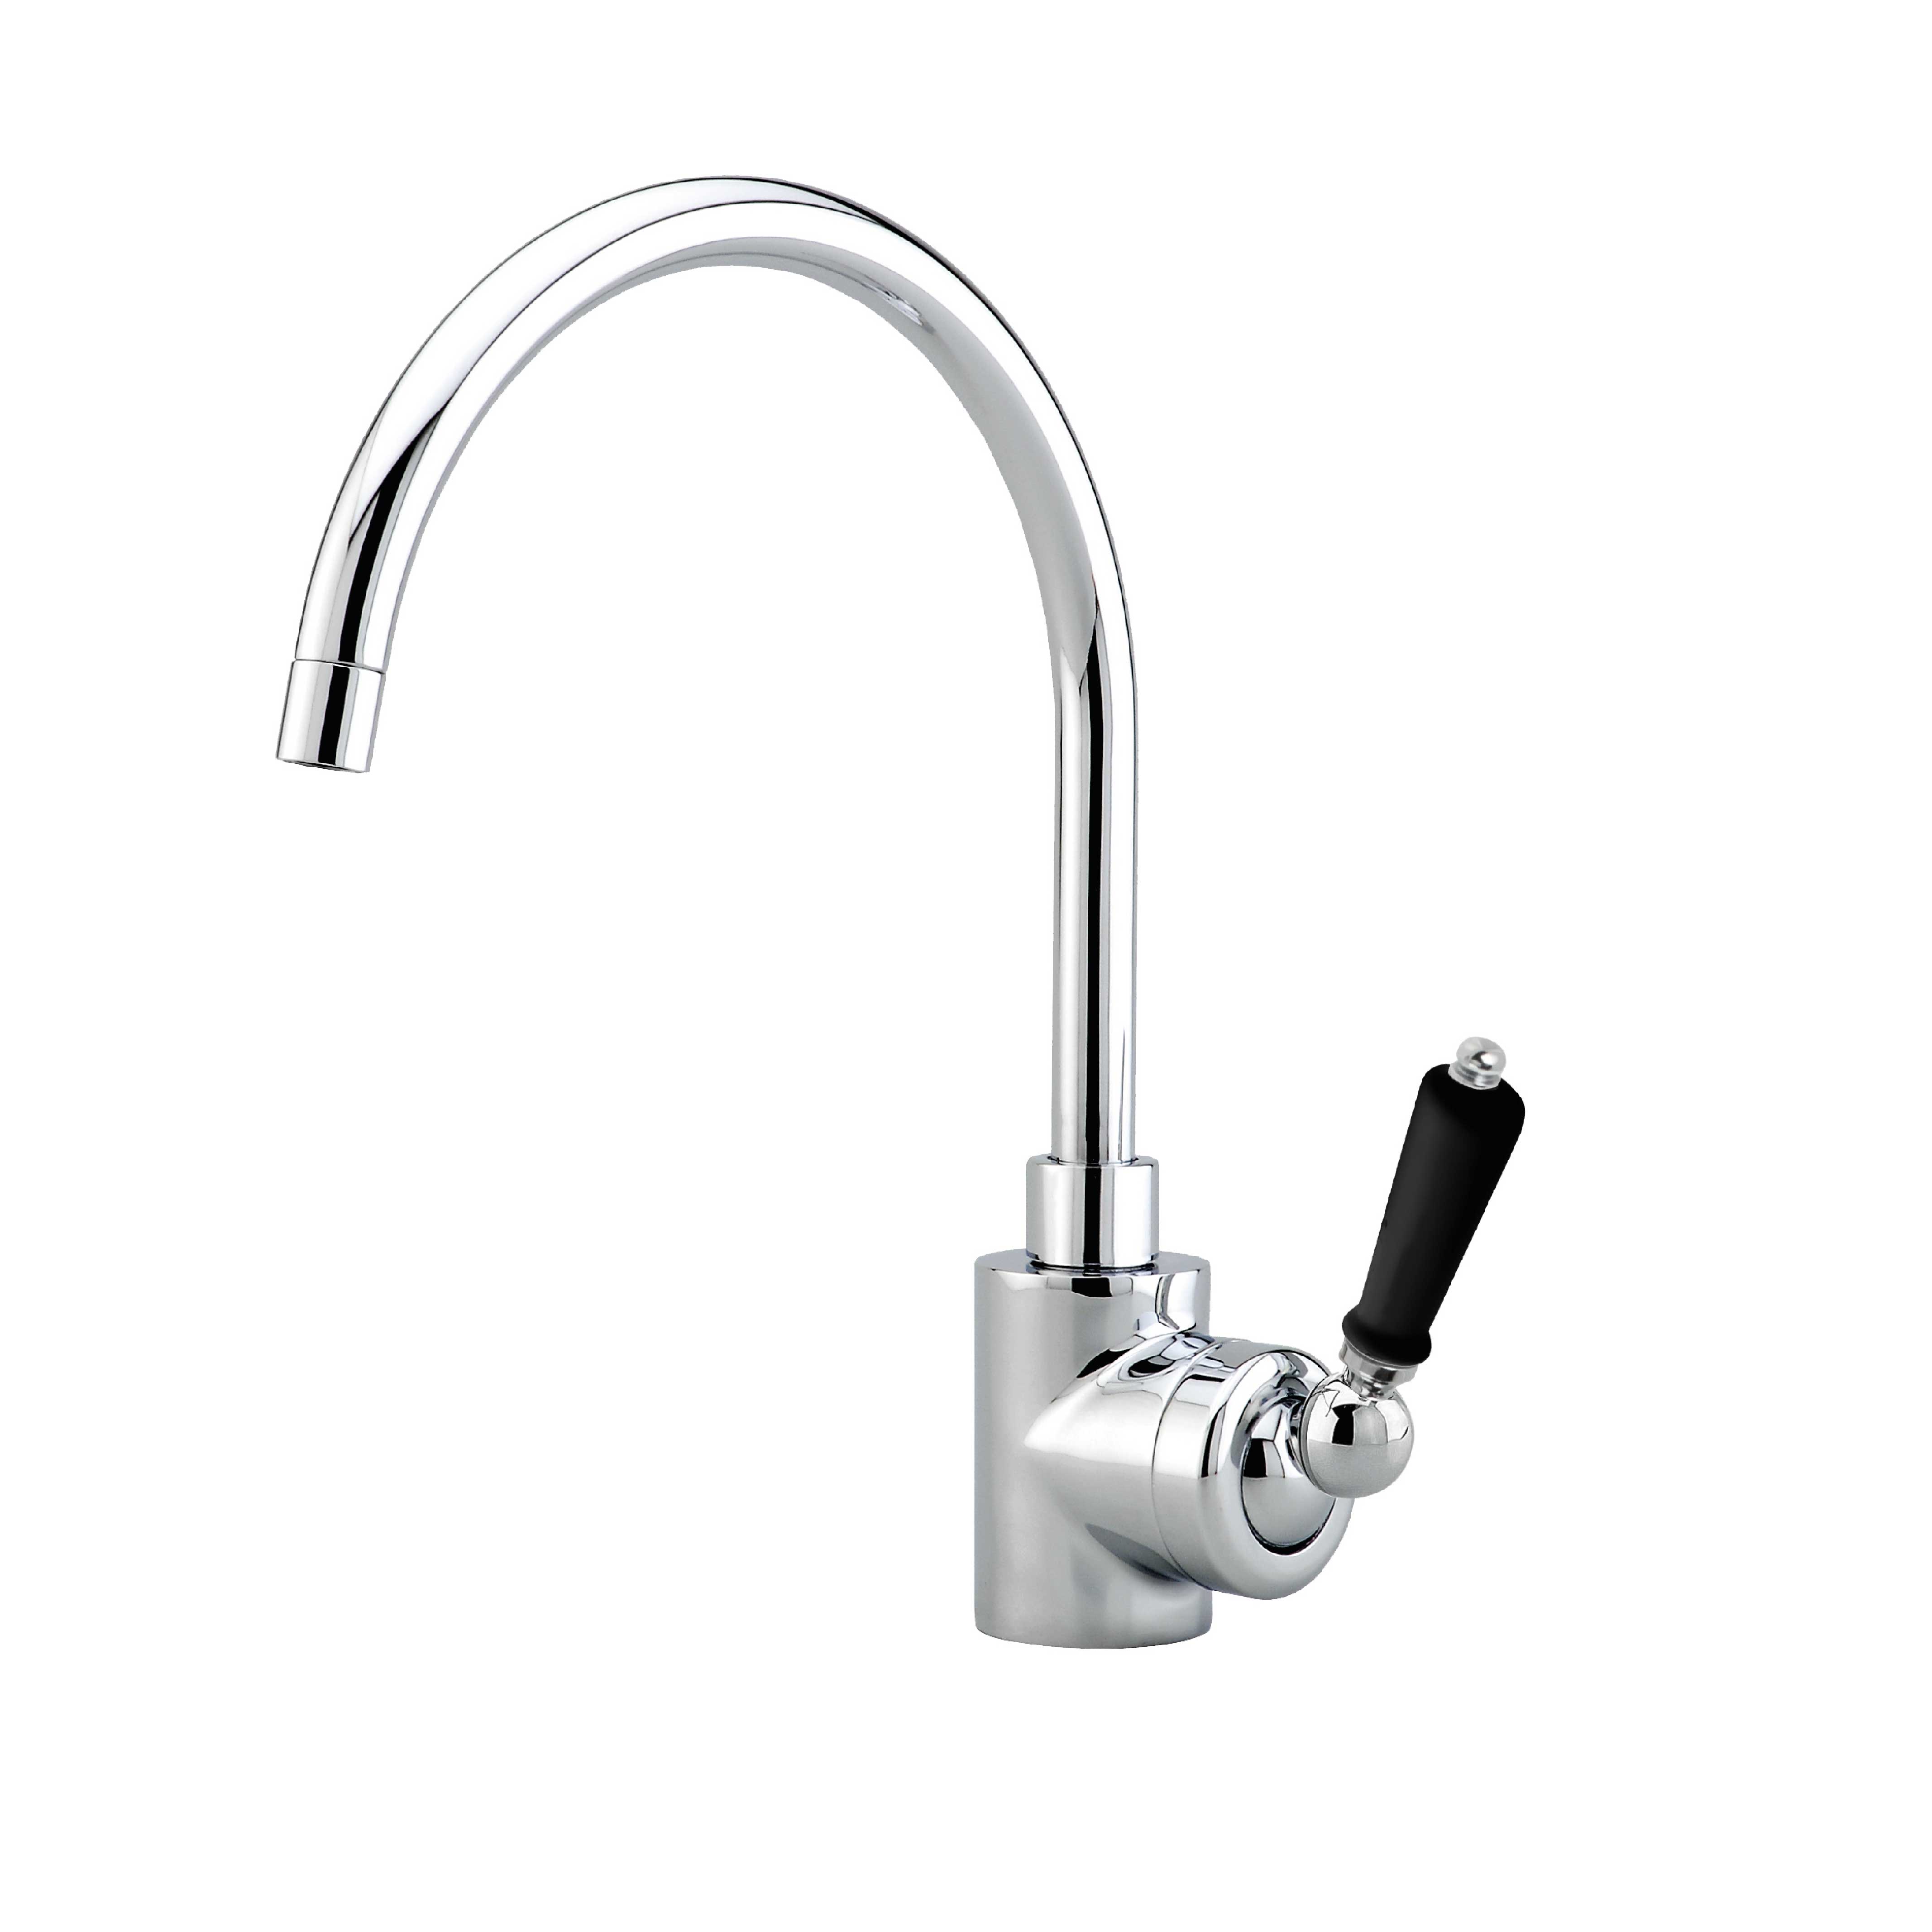 MKC-1BY5 Single-hole lever kitchen mixer